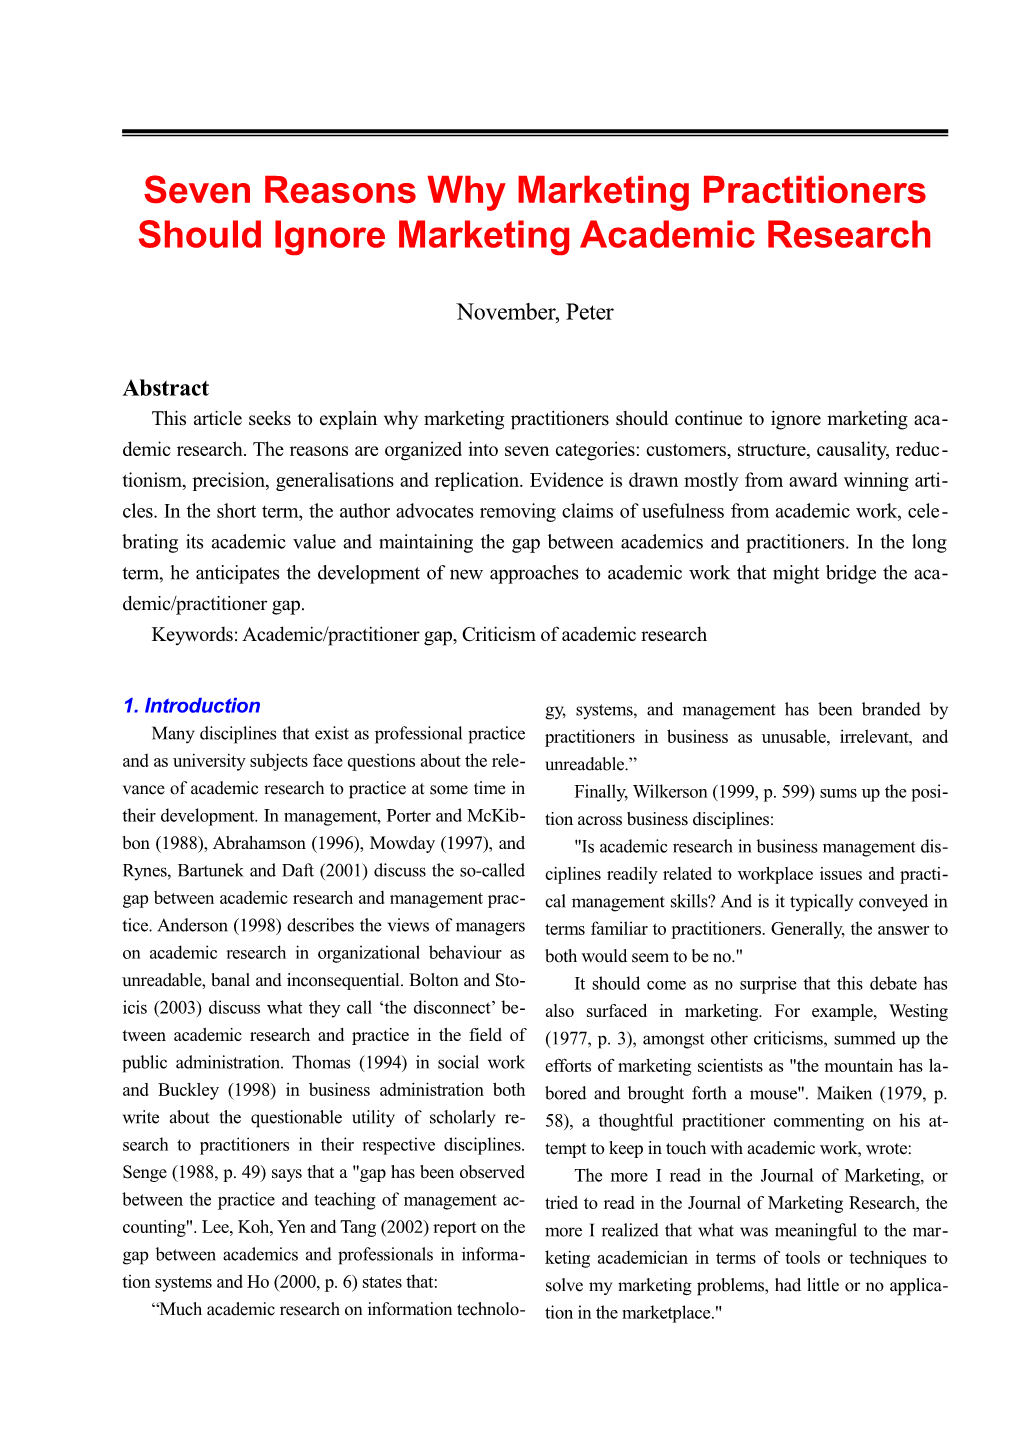 Seven Reasons Why Marketing Practitioners Should Ignore Academic Research